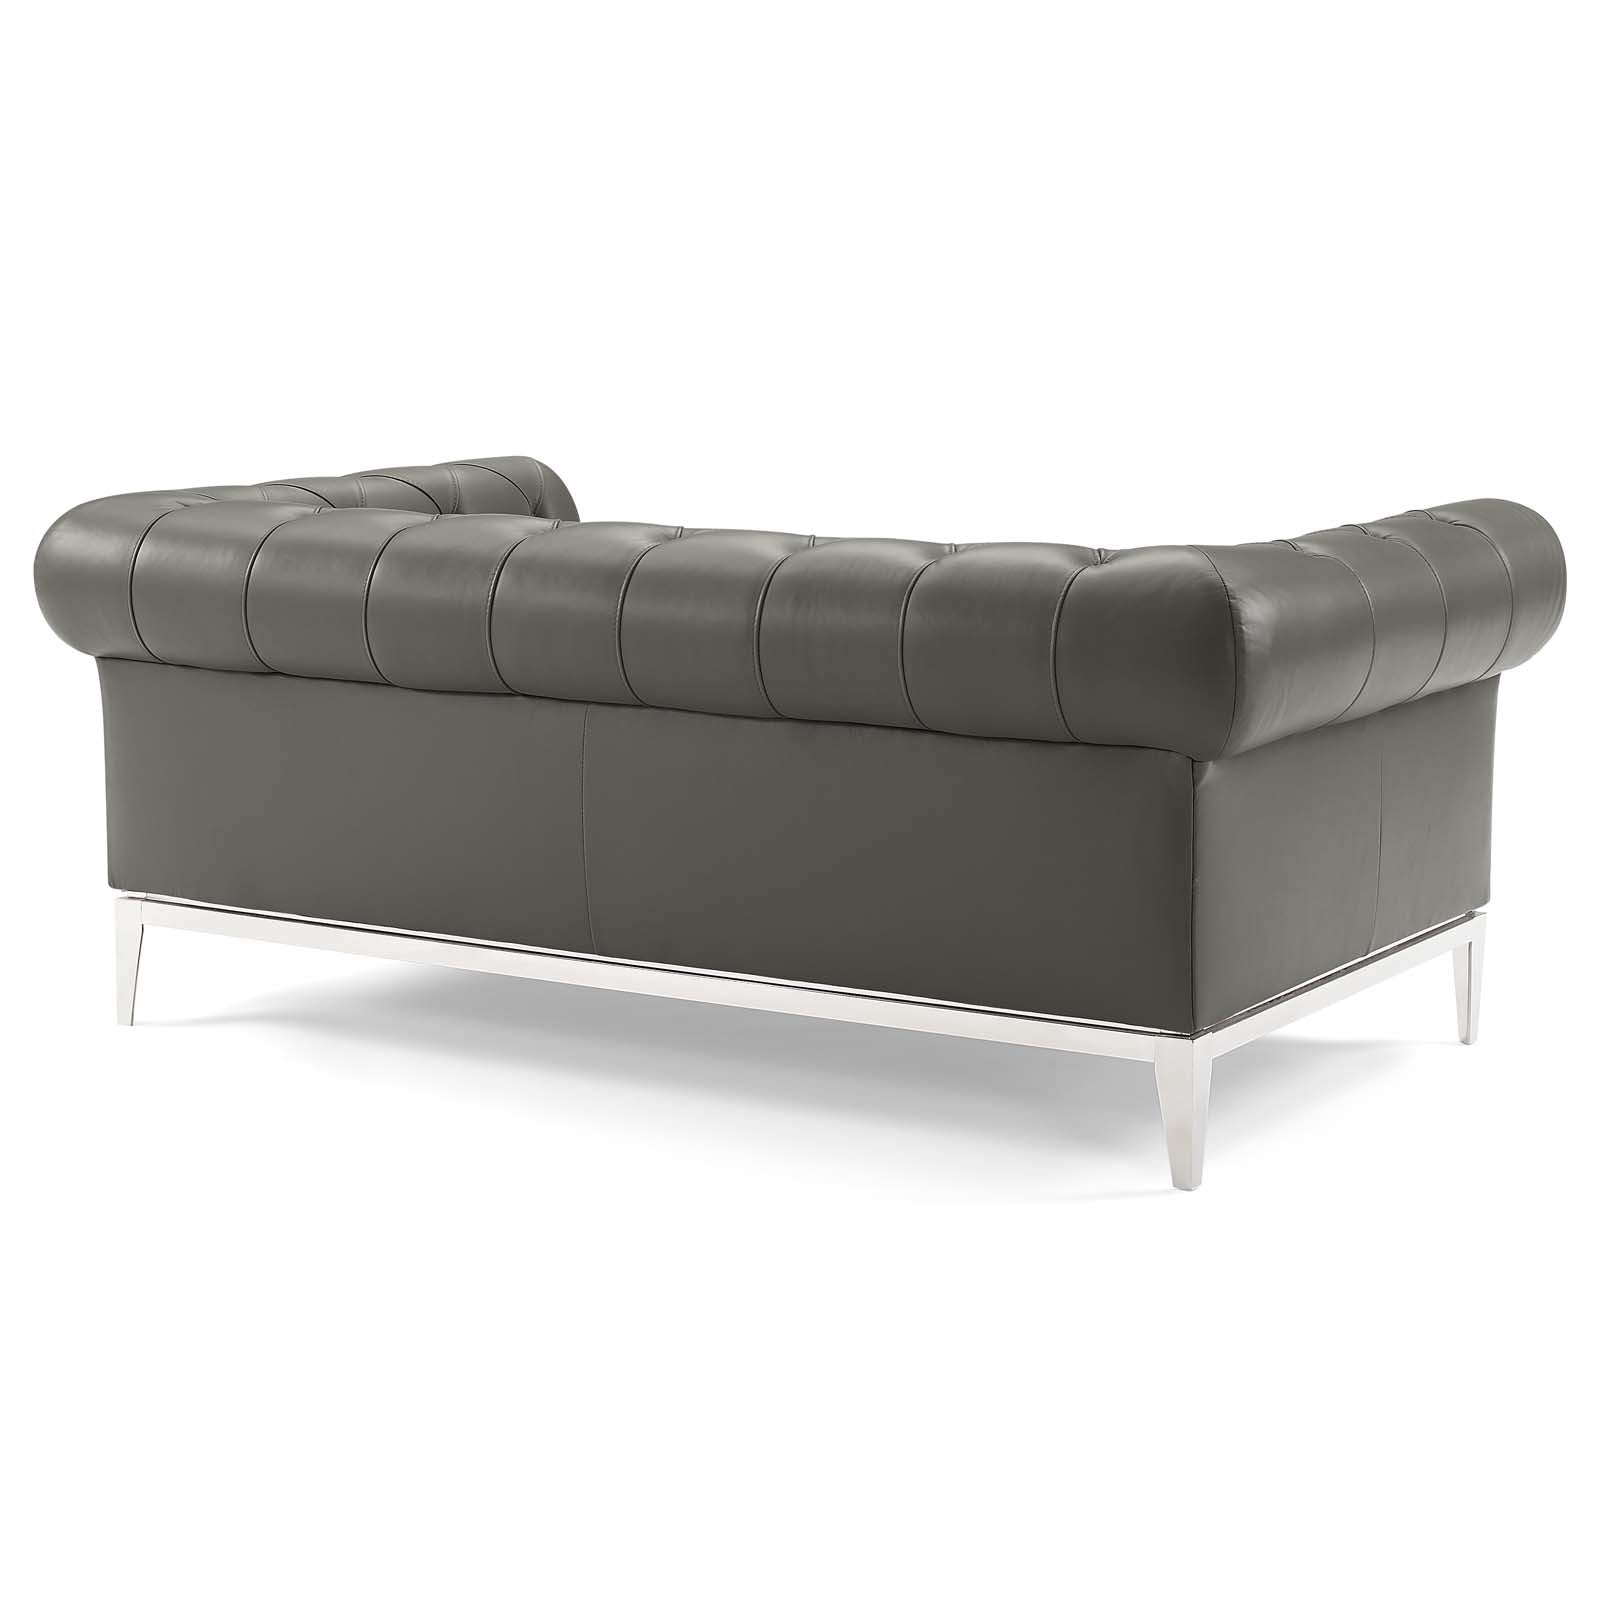 Modway Loveseats - Idyll-Tufted-Upholstered-Leather-Loveseat-and-Armchair-Gray